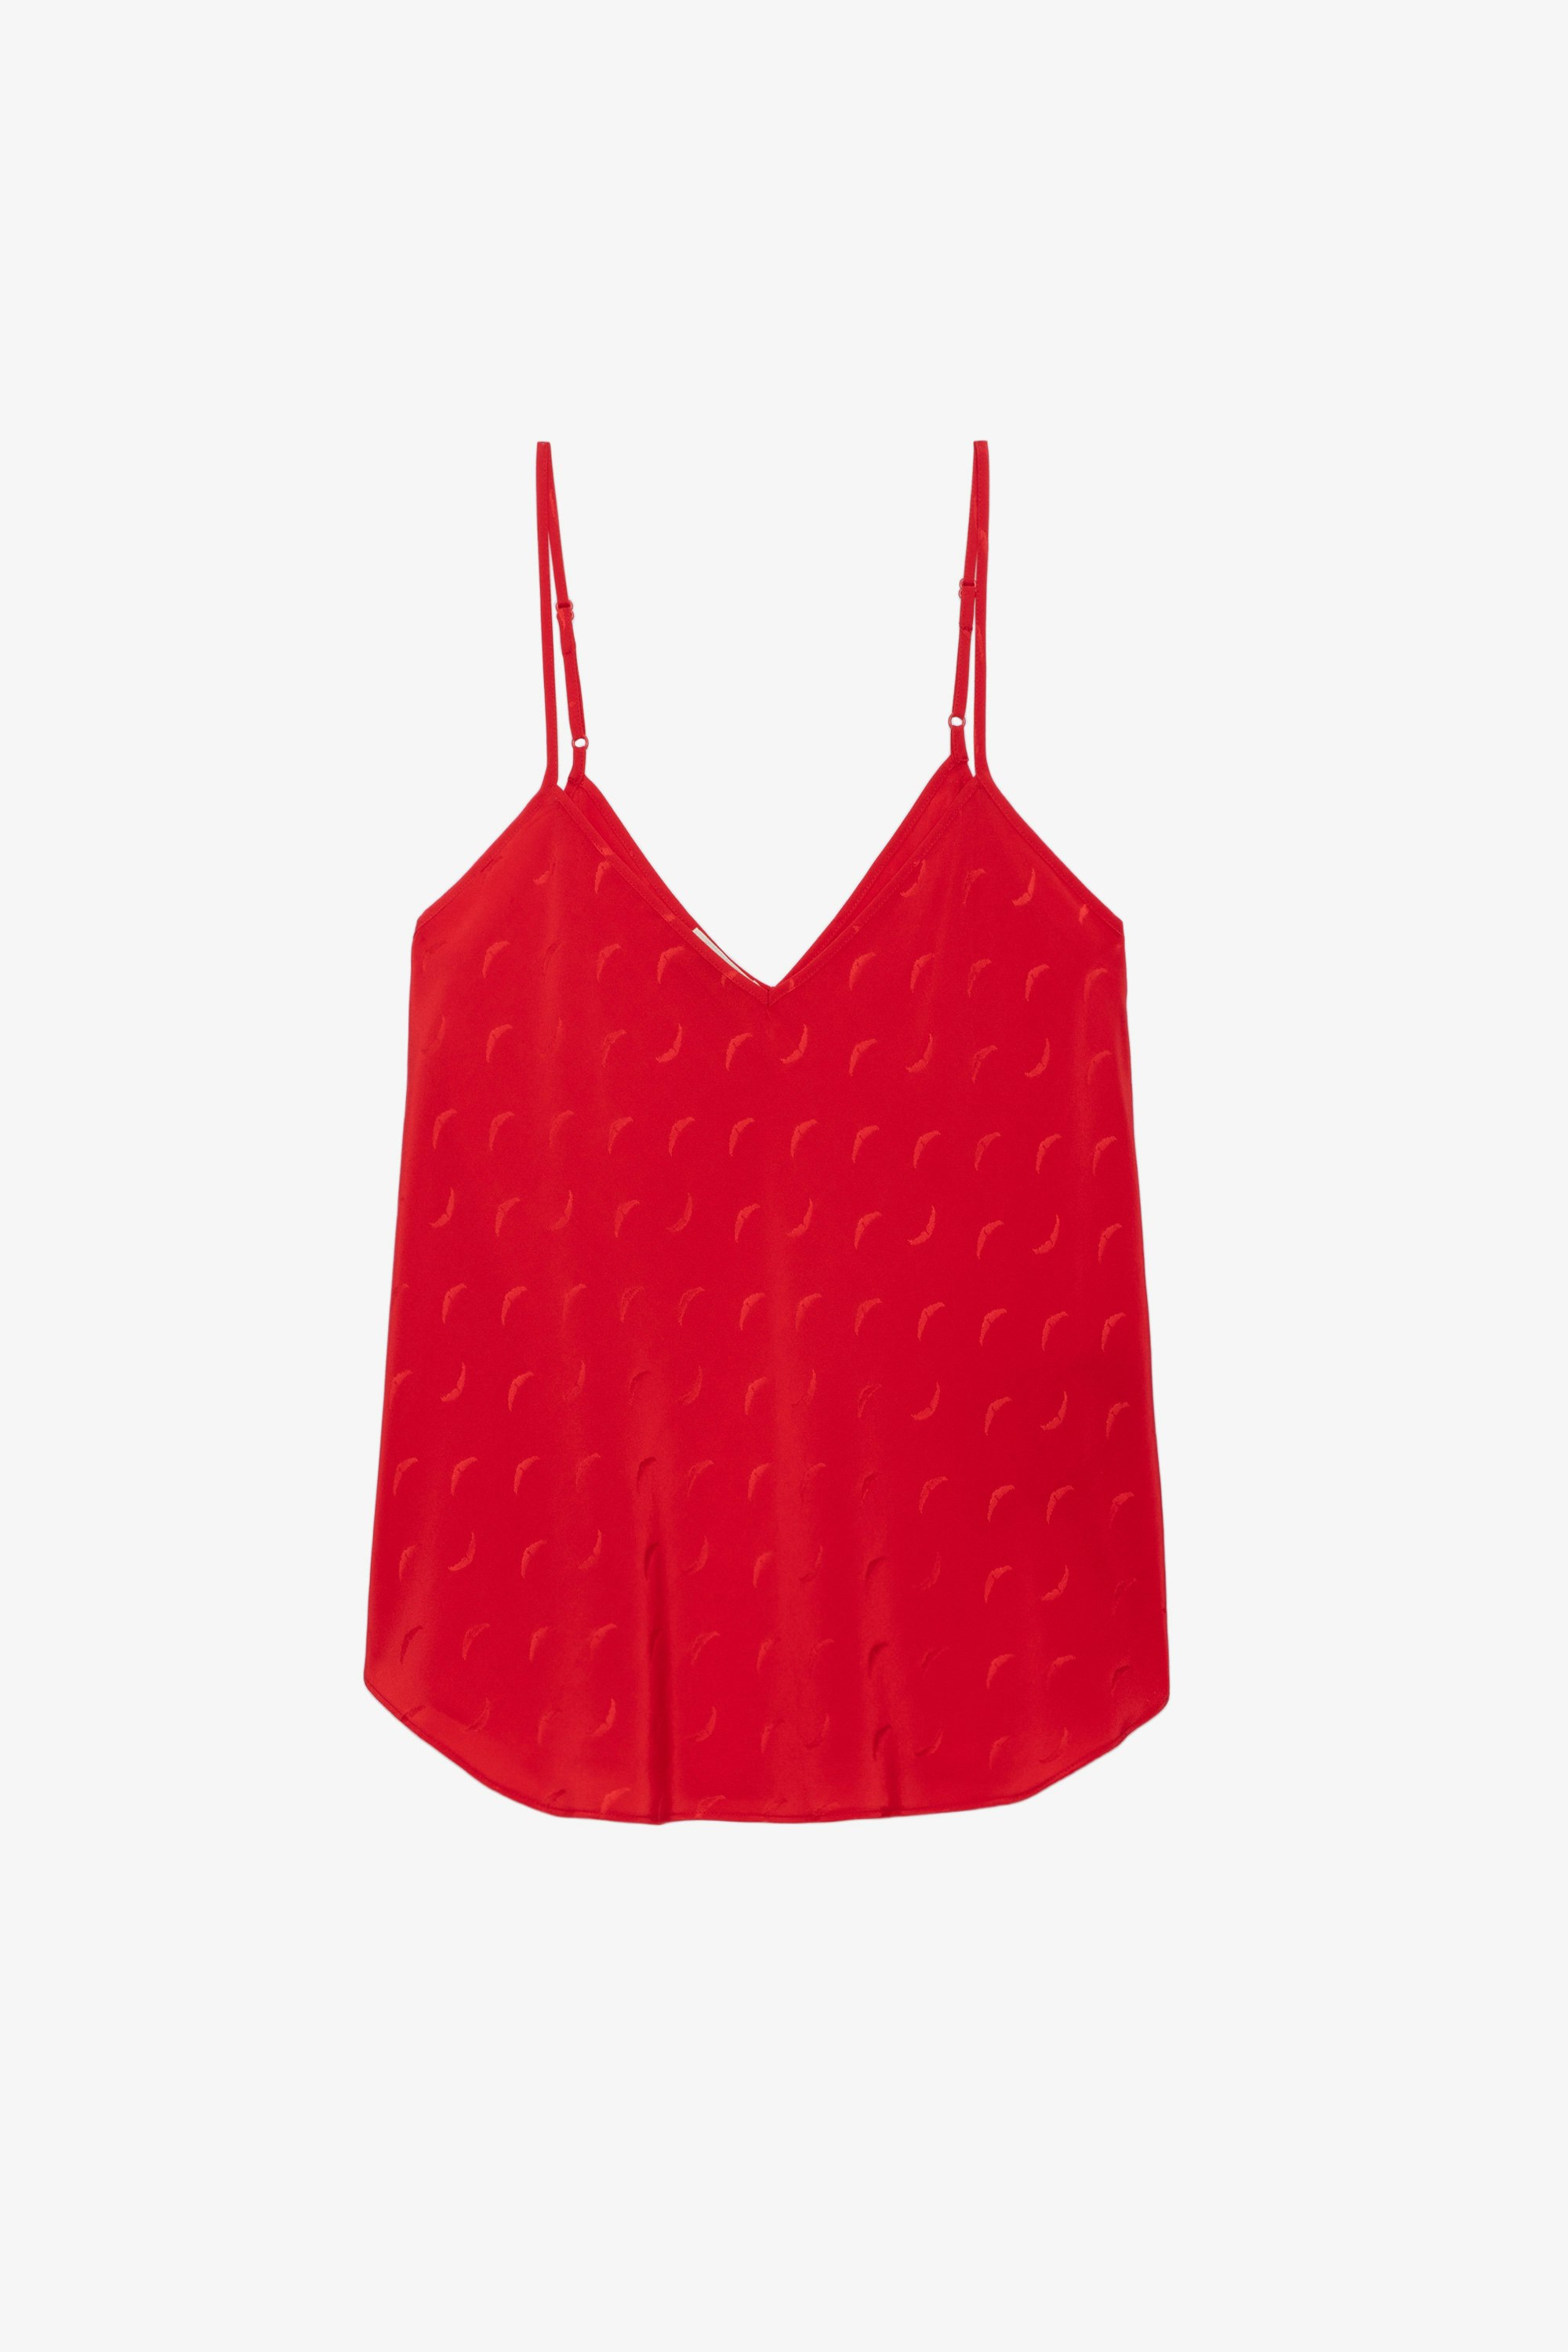 Casel Camisole - Women's red camisole with wing motifs.